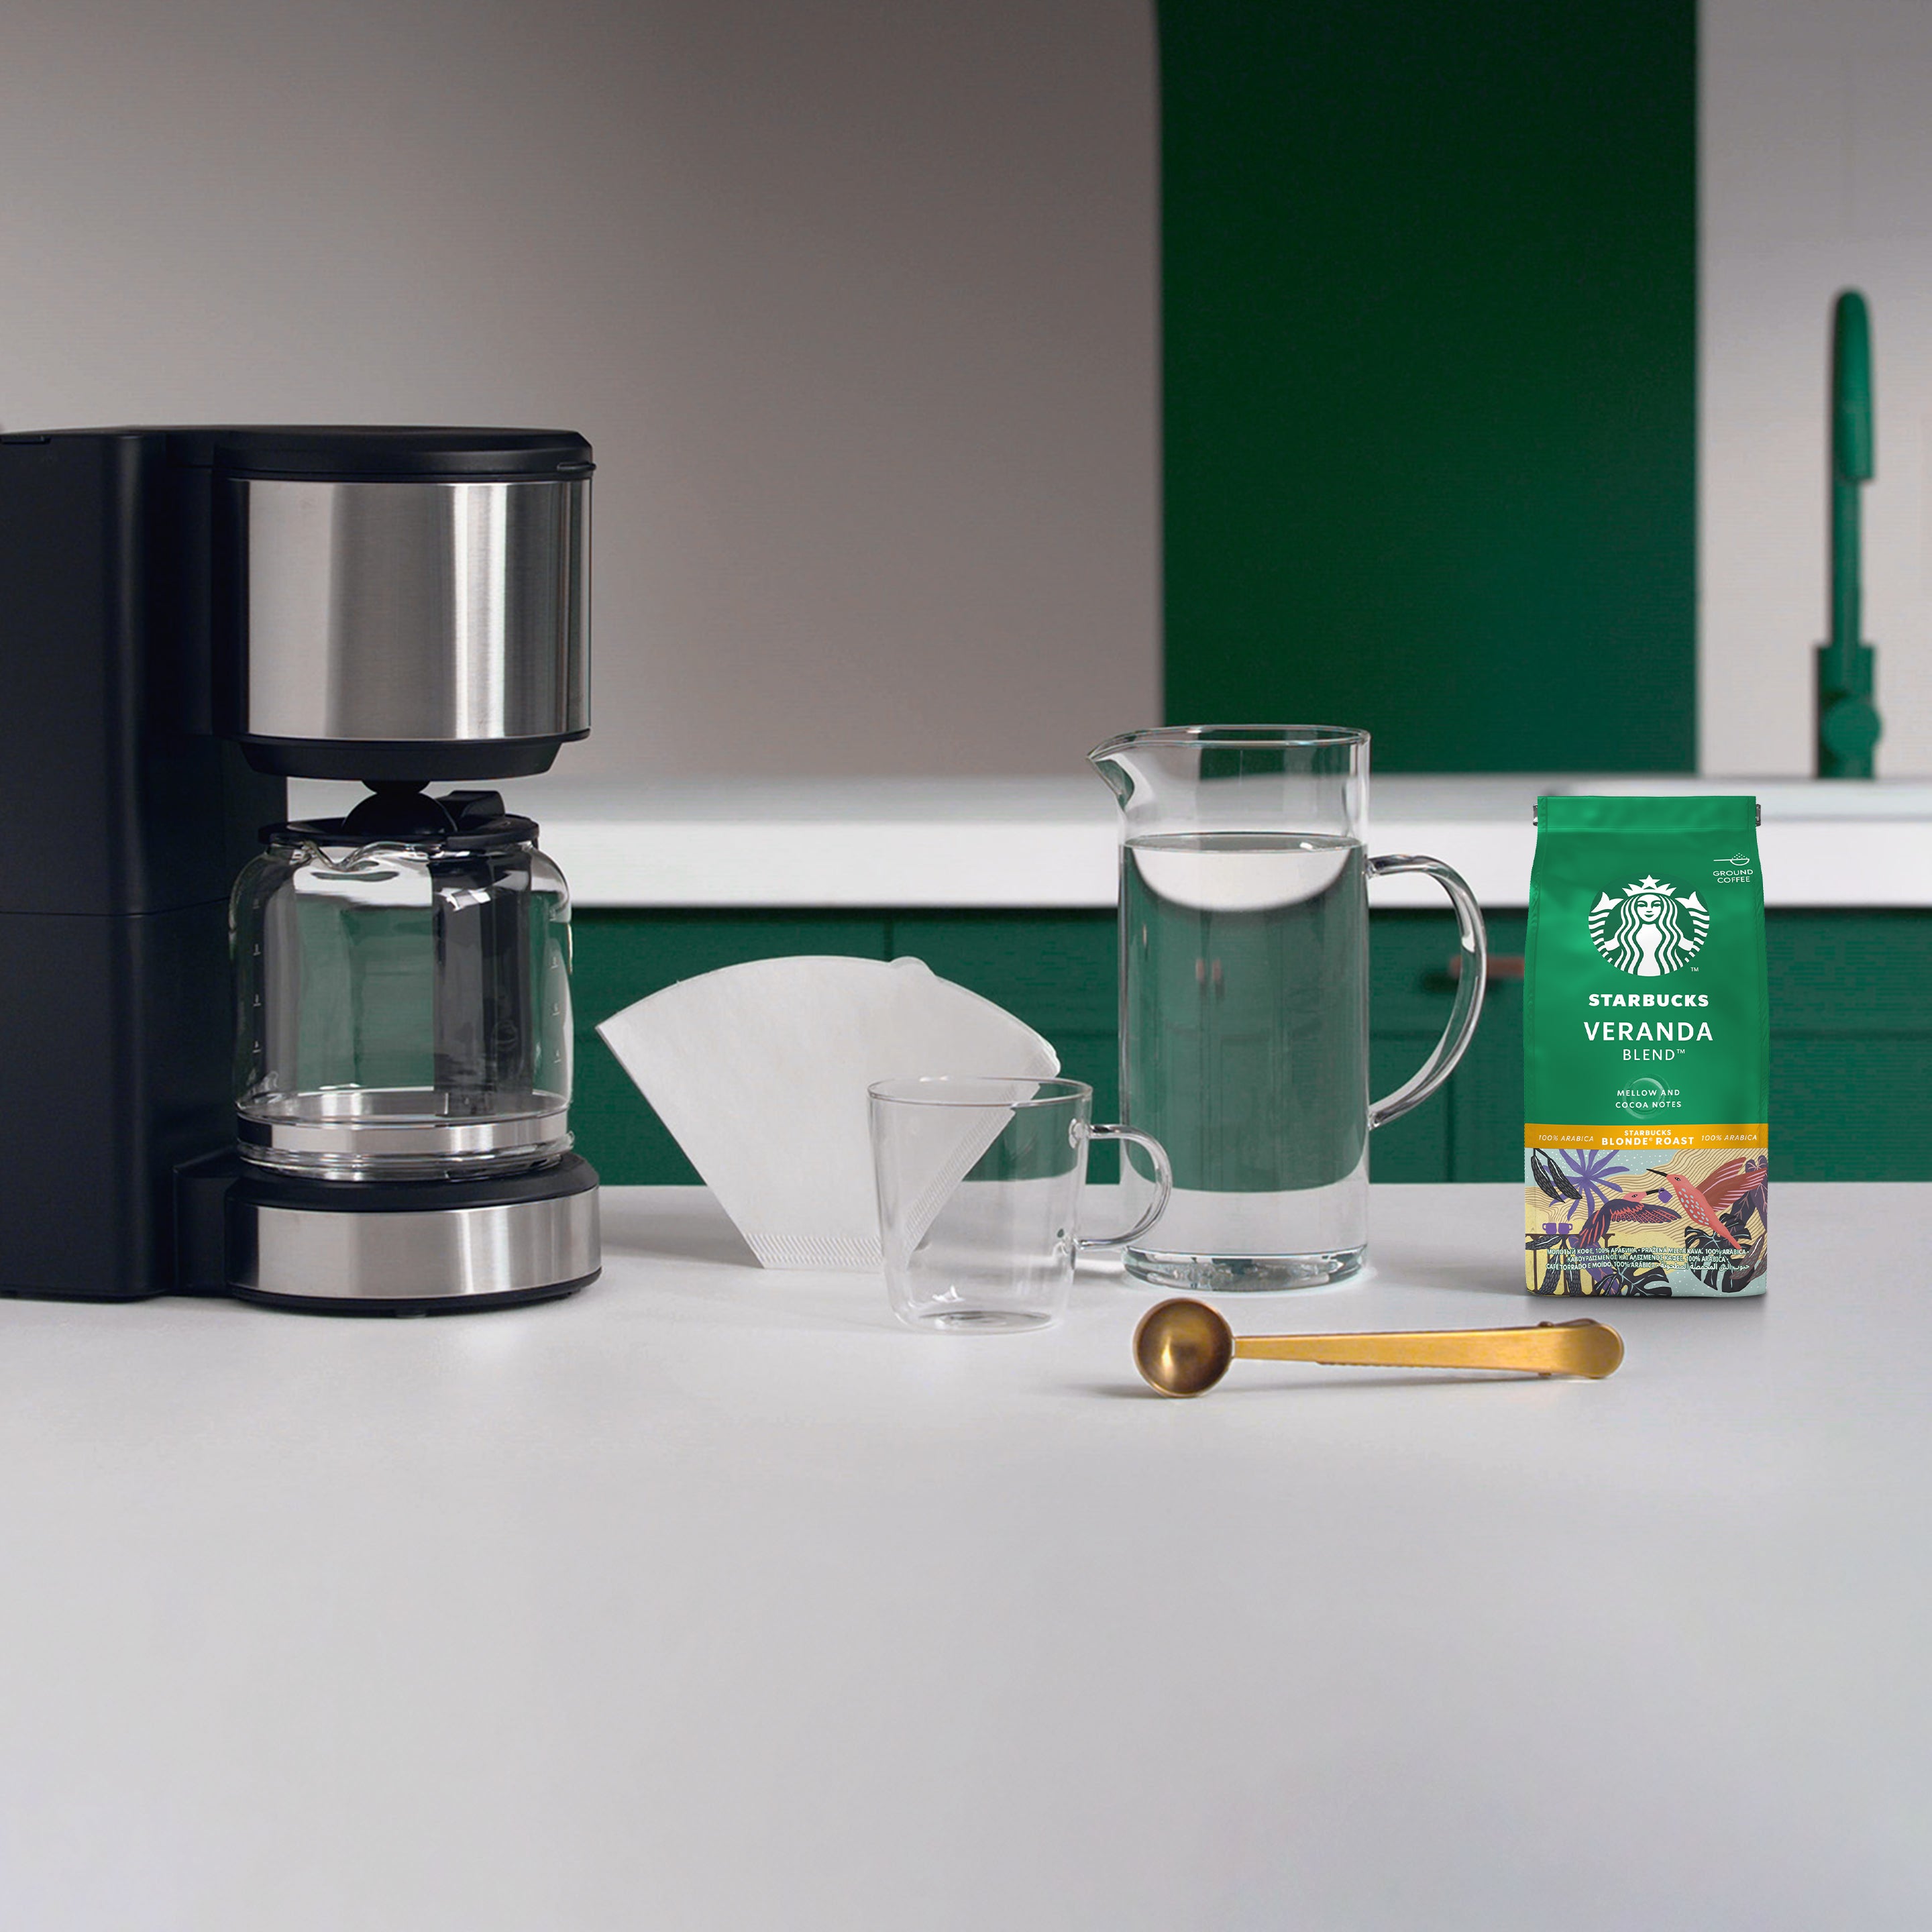 Manufacturer of Starbucks coffee machines enters partnership with